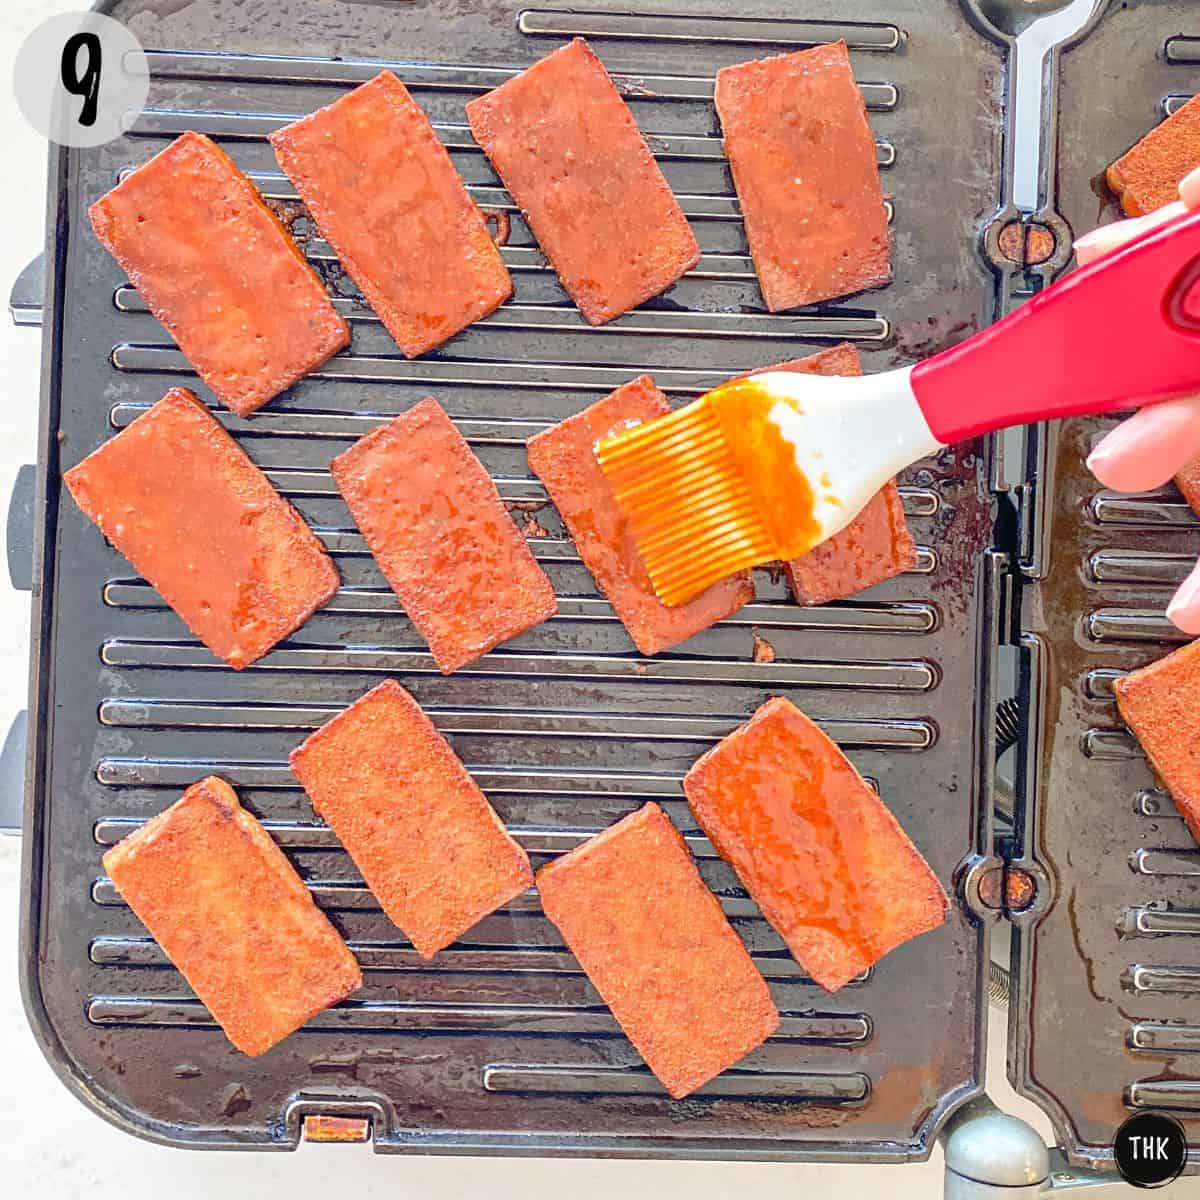 Smoked tofu slices on grill being brushed with red sauce.